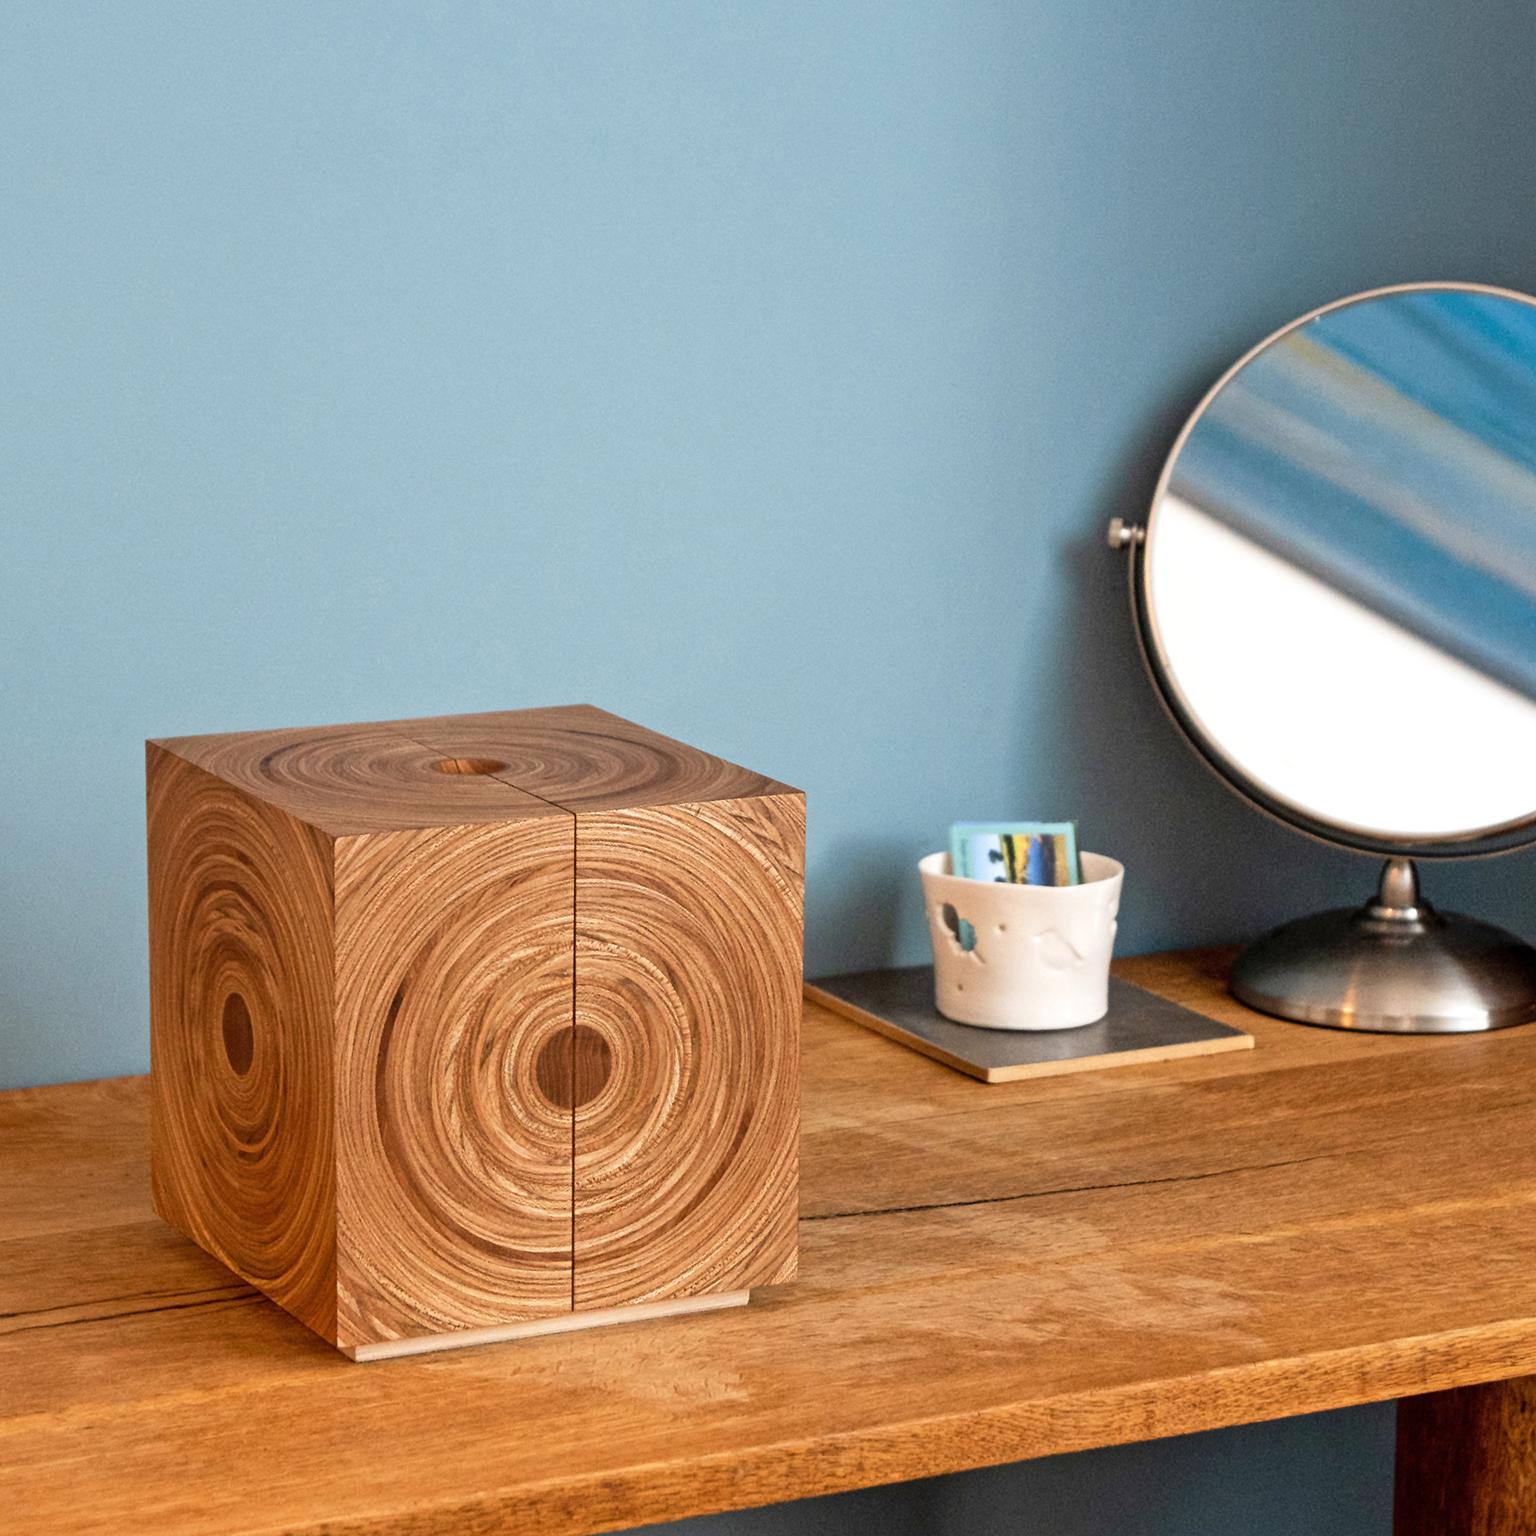 The contemporary cubed 'Squaring the Circle' jewellery box by Edward Johnson is made in elm and fumed oak with a magenta suedette fabric.

Each side of the jewellery box is made from Edward’s circular ‘Murano’ veneers with each surface reminiscent